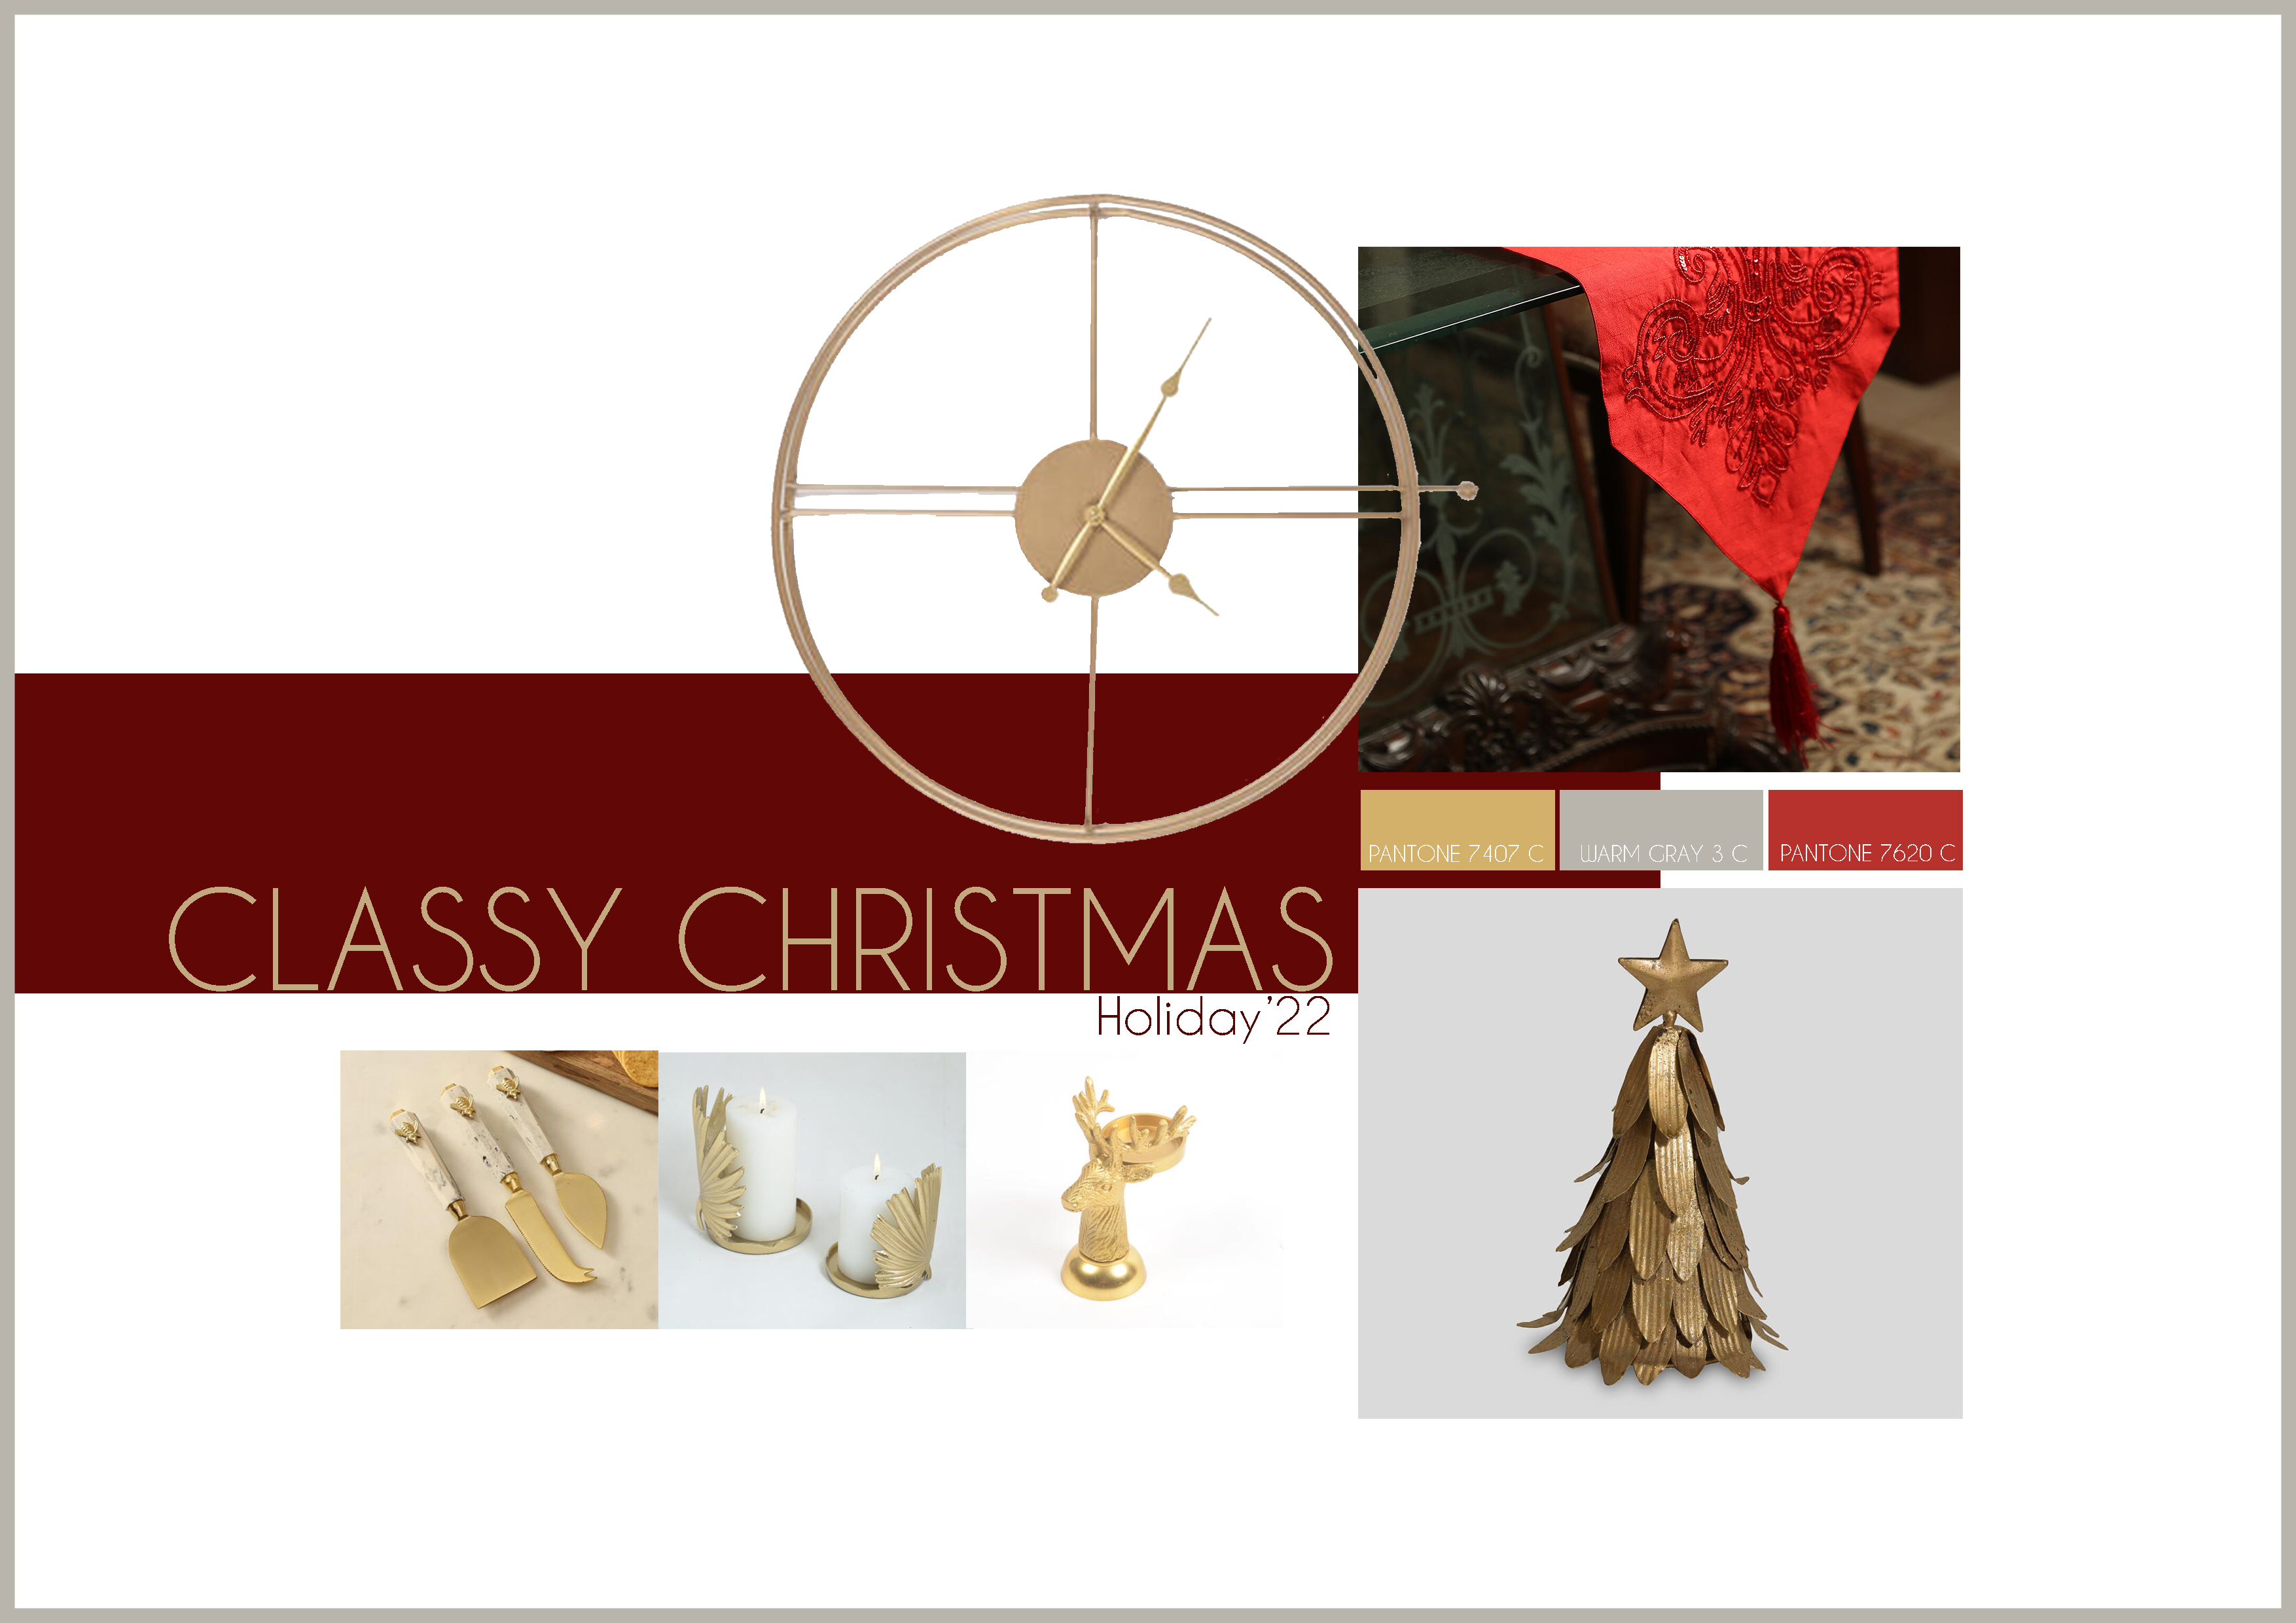 A christmas themed mood board with tree decor, candles and red table runner, and gold animal figurine